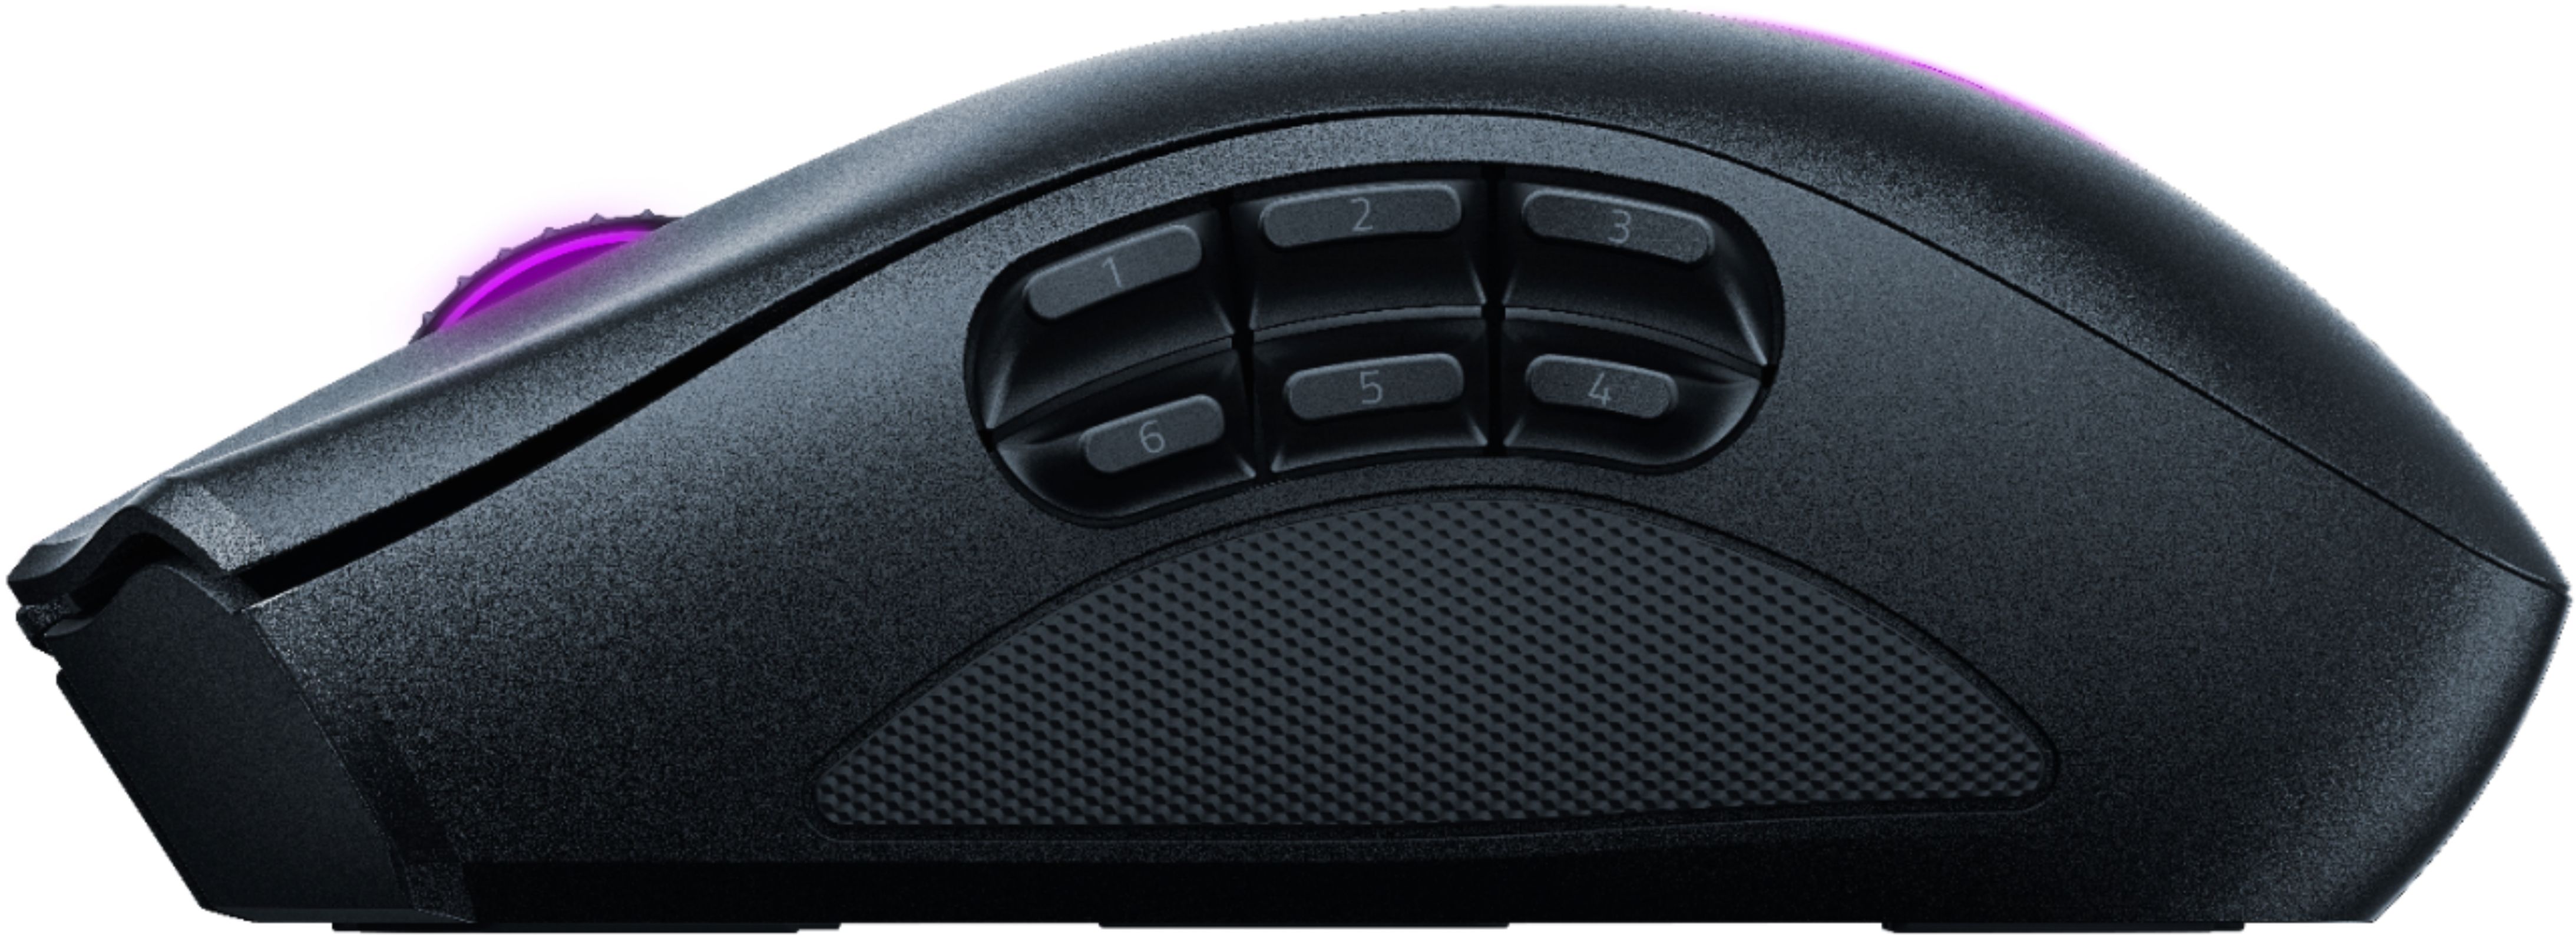 Razer Naga Pro unboxing and review - oh boy, that's a lot of buttons 